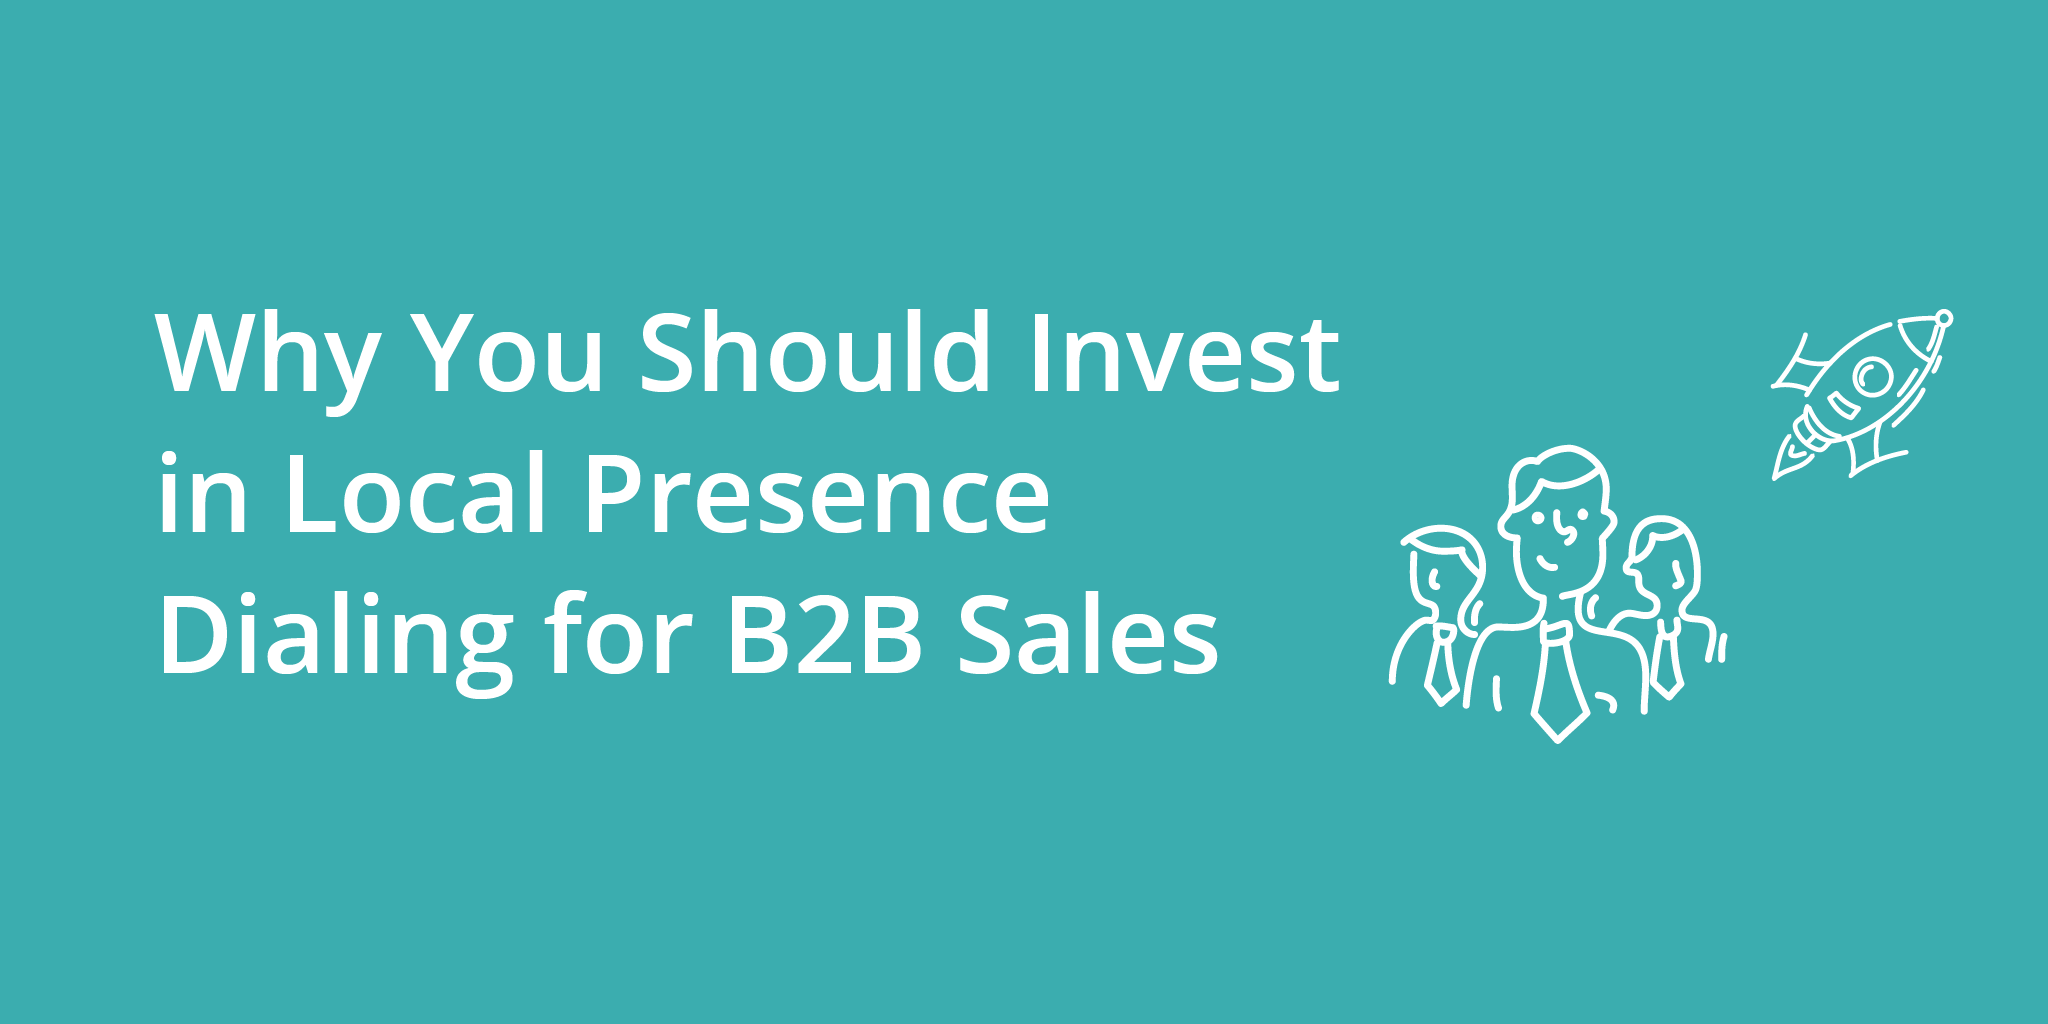 /assets/img/uploads/articles/why-you-should-invest-in-local-presence-dialing-for-b2b-sales-teams_sales-cadence-blog-header.png